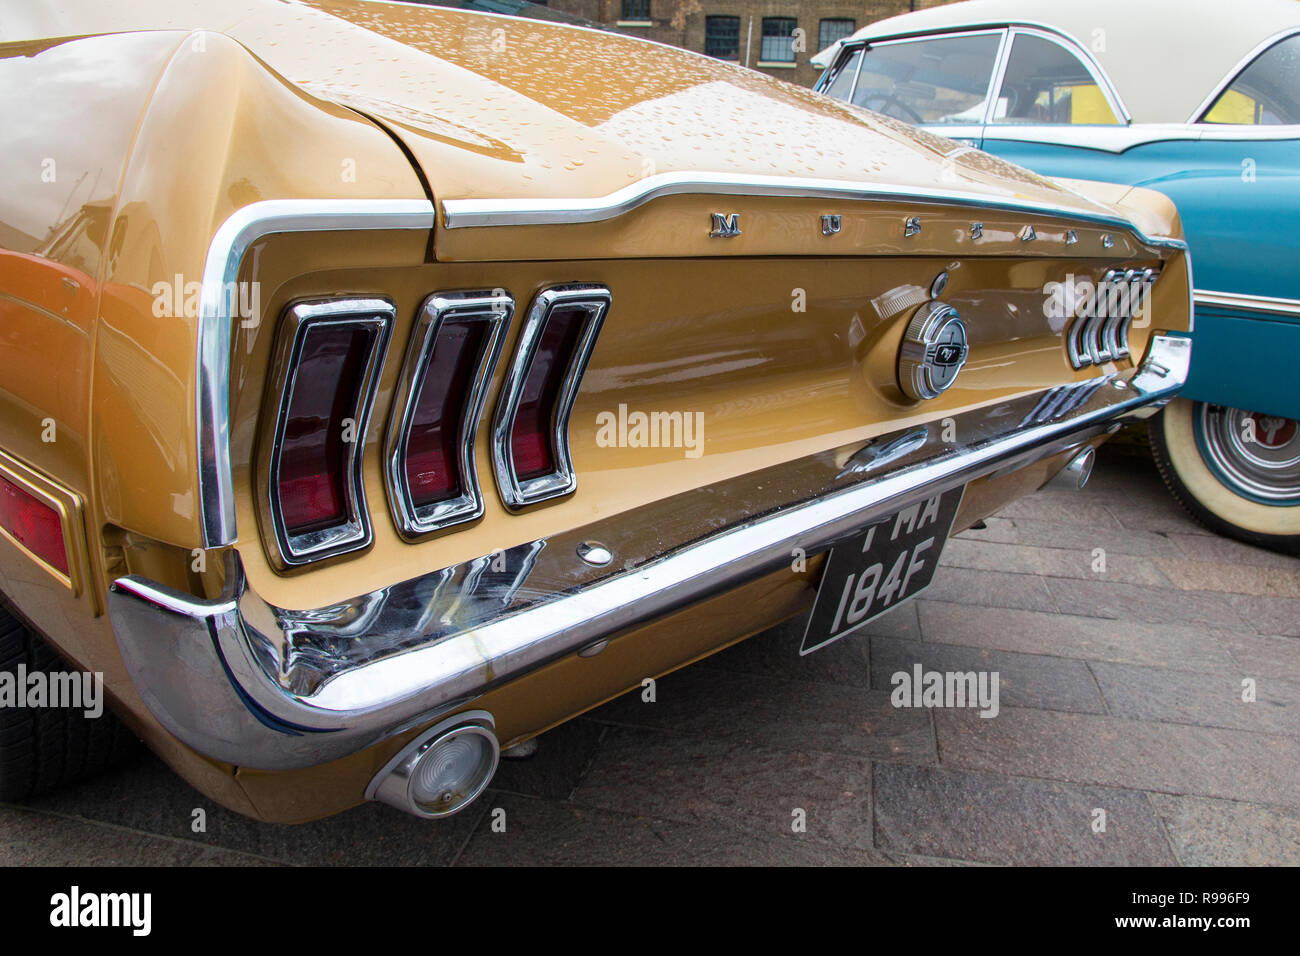 LONDON, ENGLAND - April 28, 2018. Ford Mustang at the annual Classic Car Exhibition and Vintage Clothing Market at Kings Cross, London, England, April Stock Photo